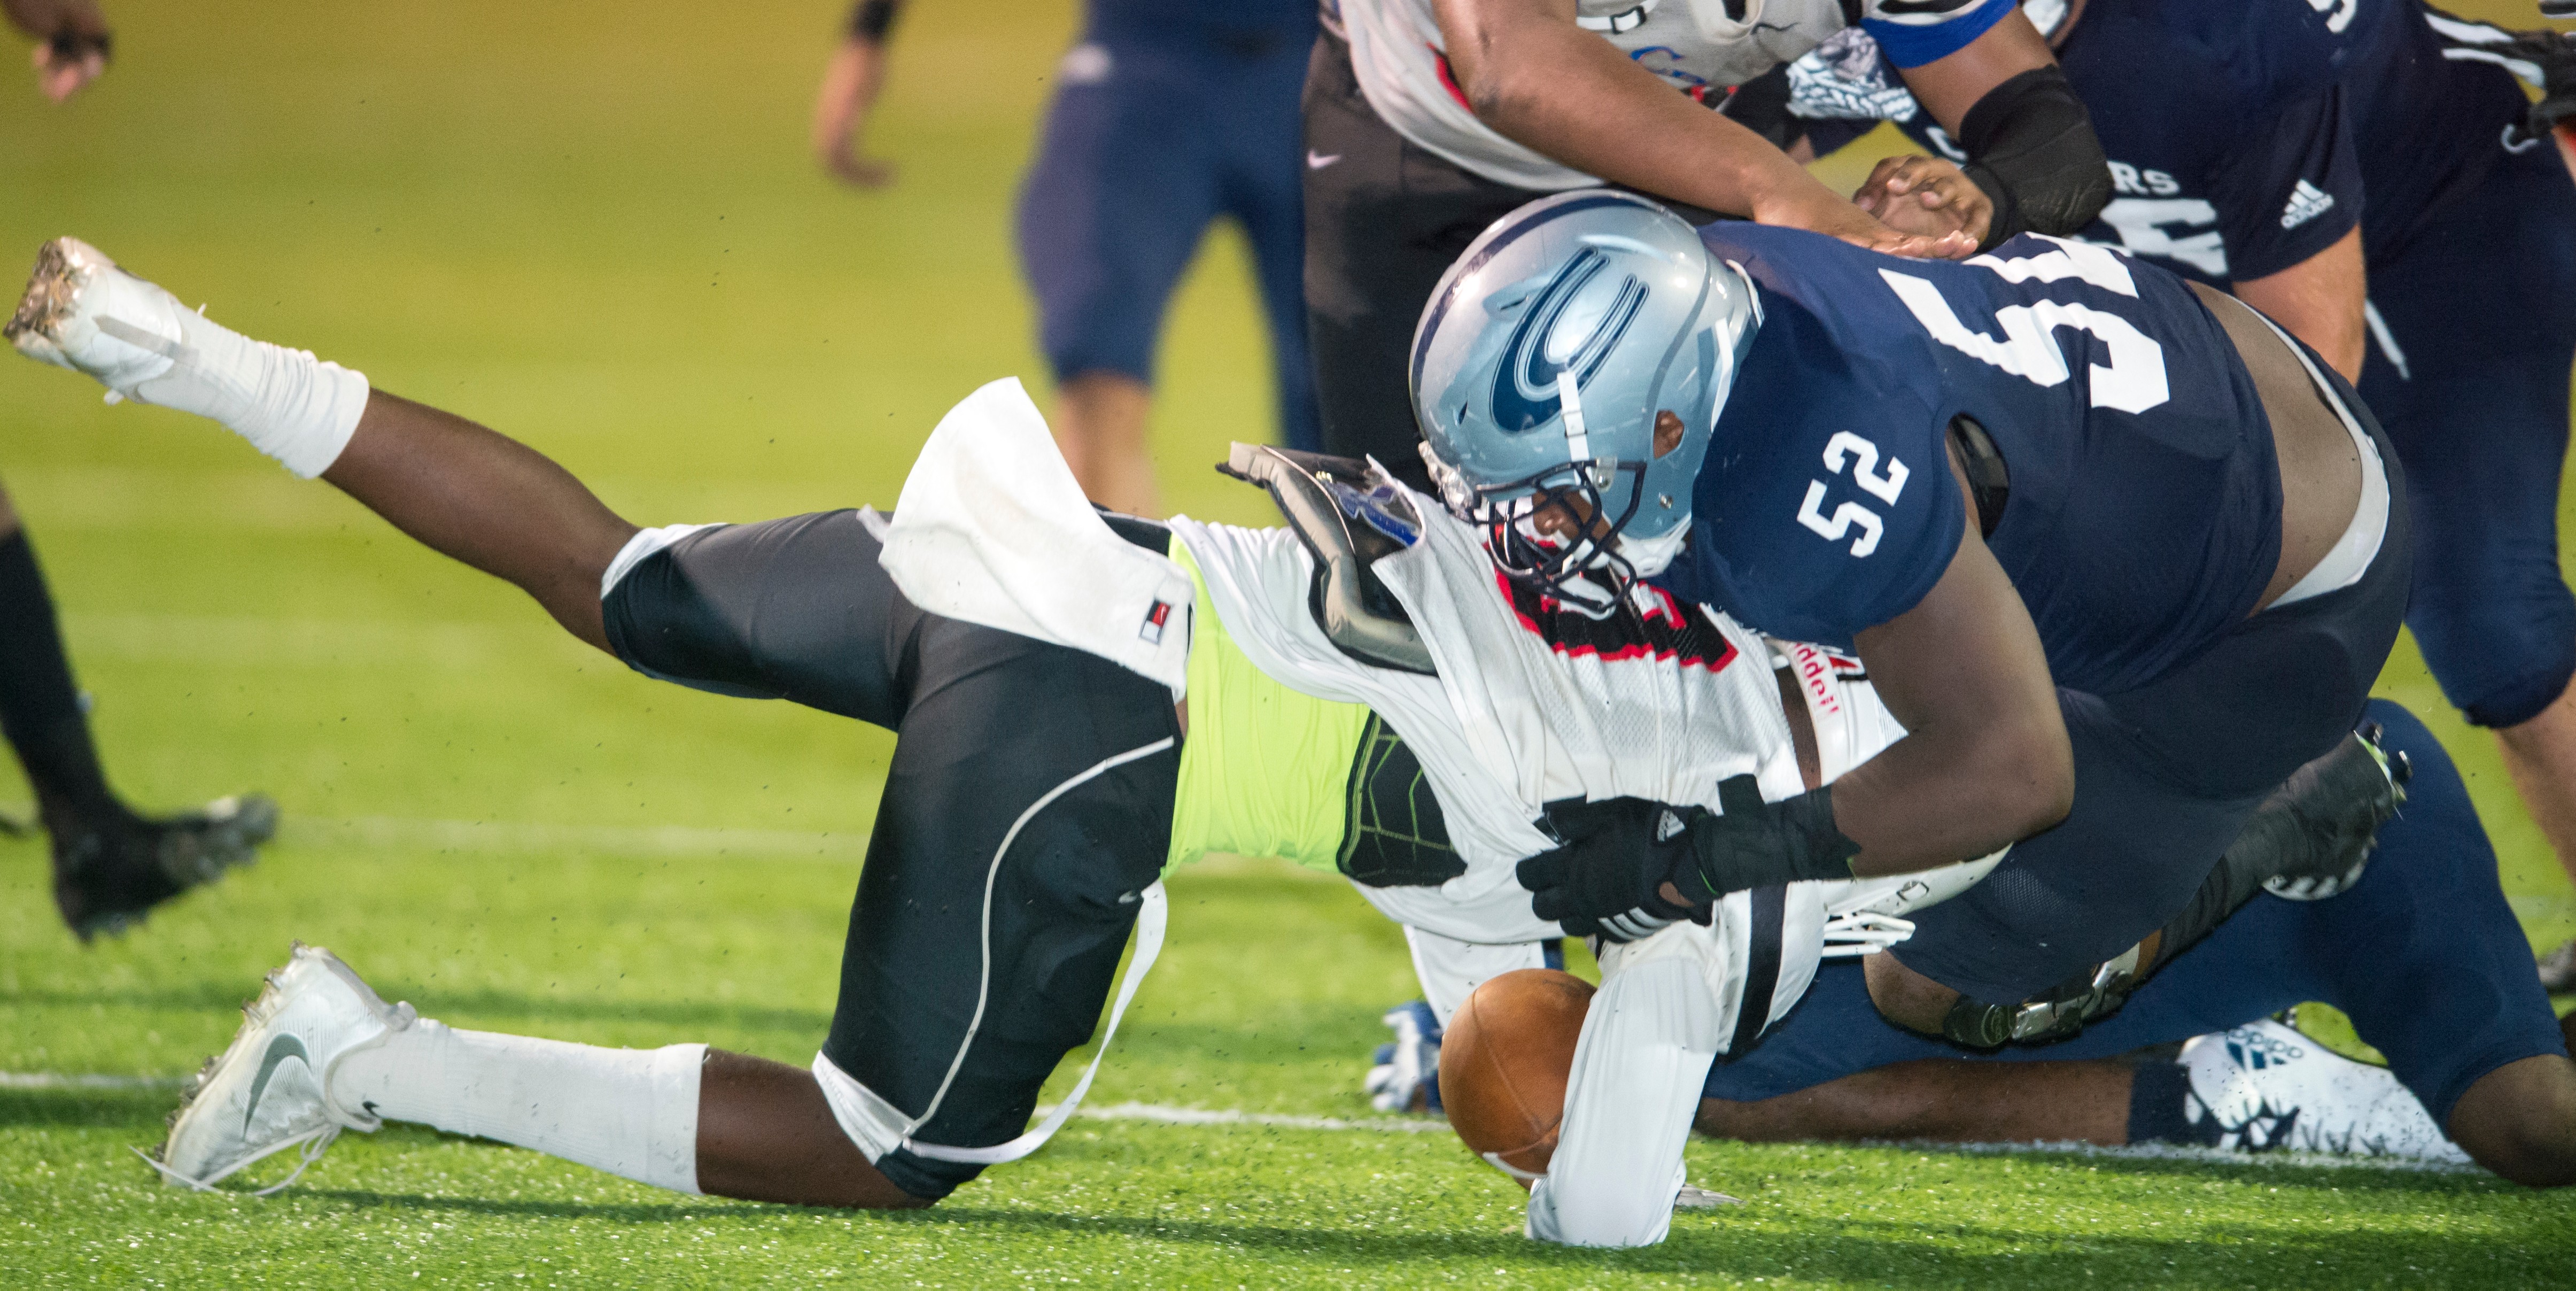 Clay-Chalkville returns to winning with a 40-20 victory over Center Point